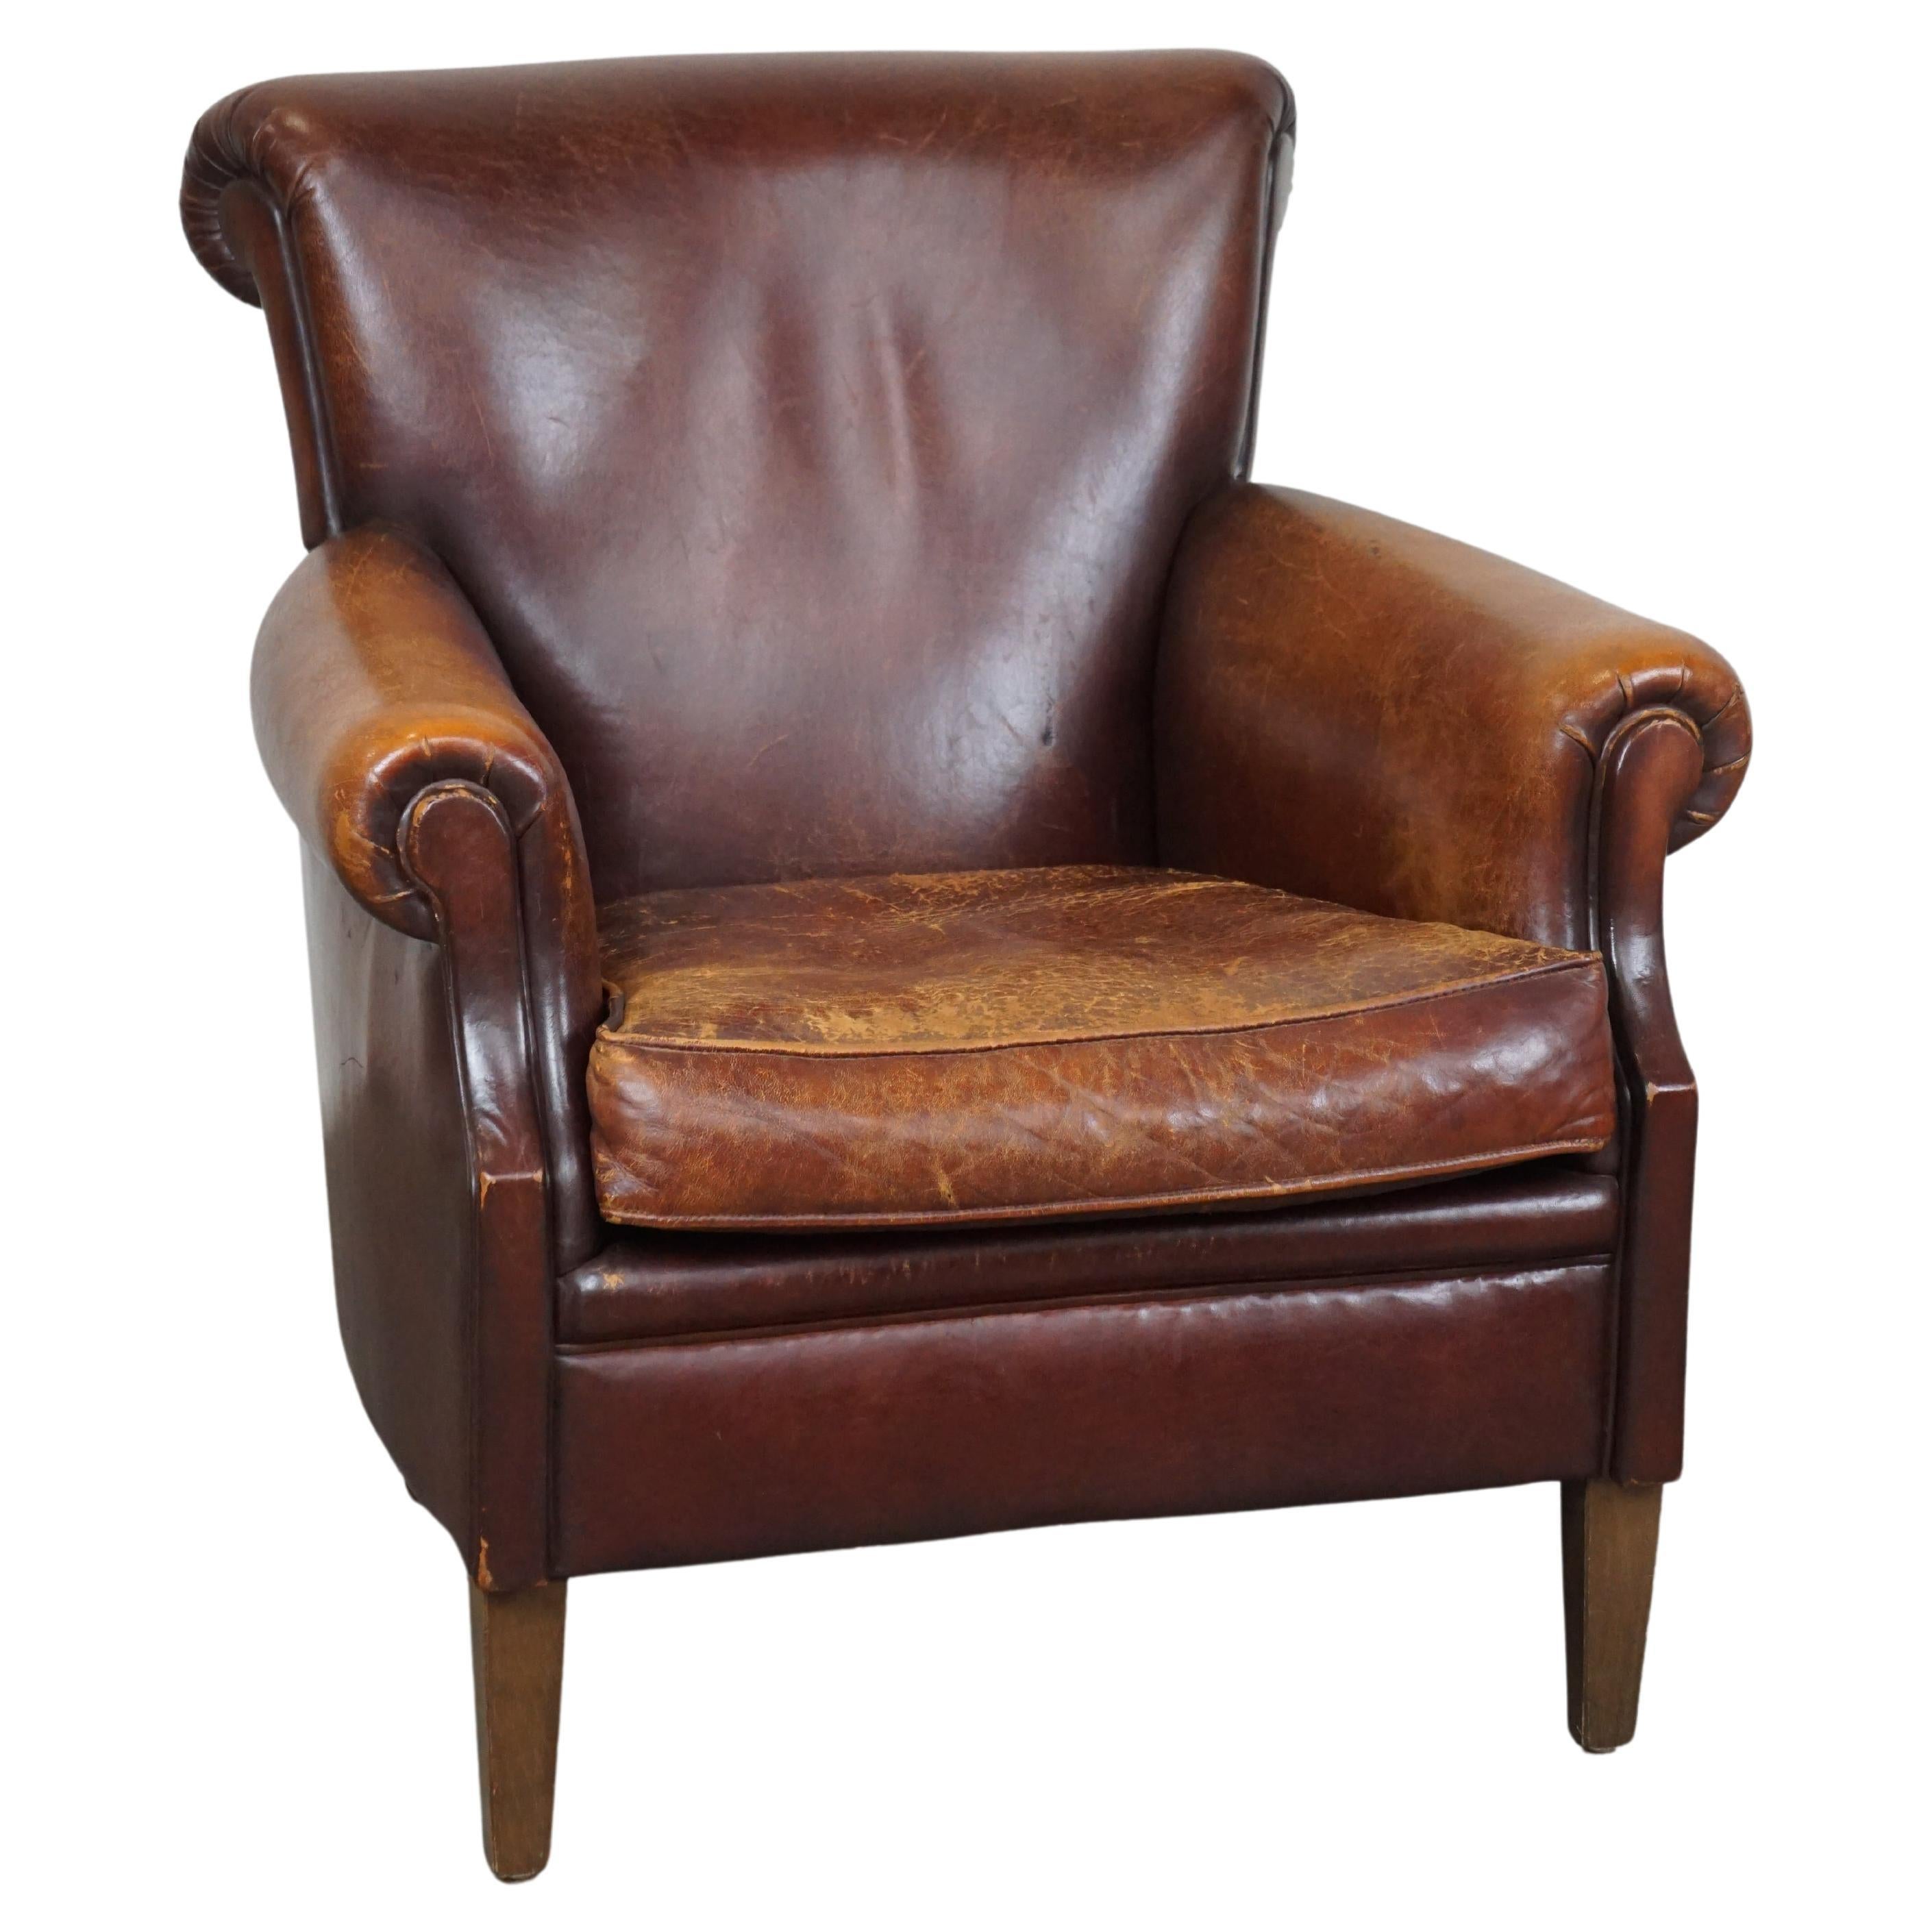 Rugged and Worn but Very Comfortable Sheepskin Leather Armchair 